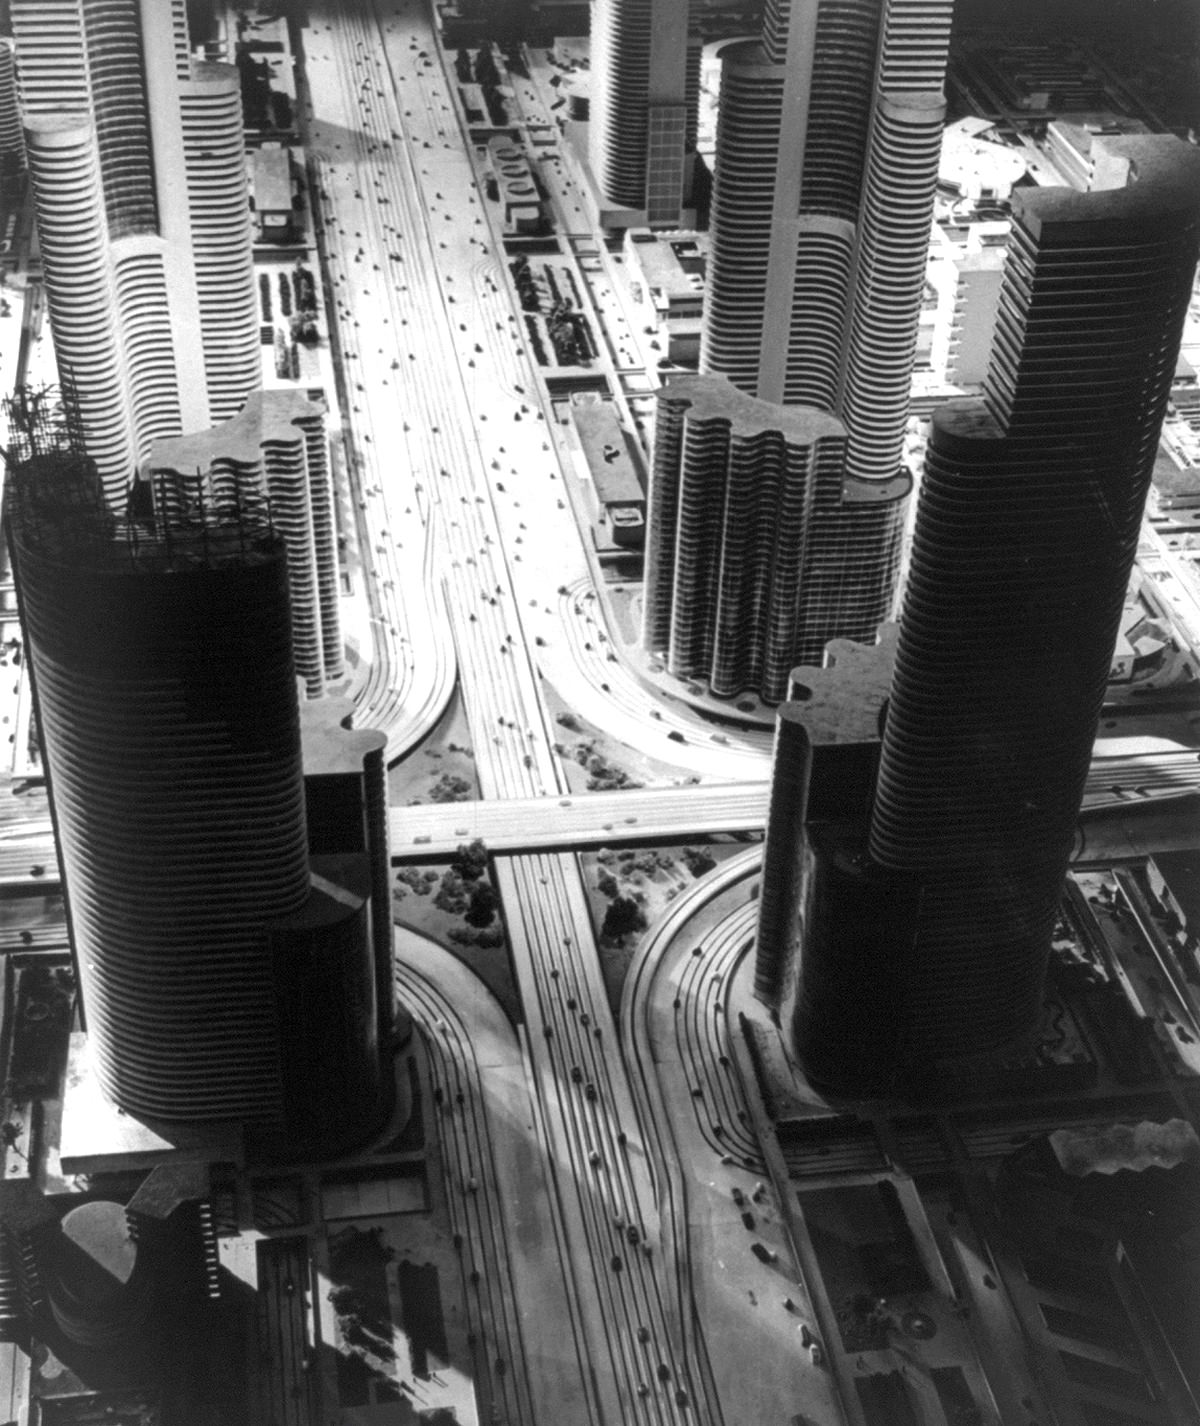 Futurama, the model city of 1960, designed by Norman Bel Geddes for the General Motors Exhibit at the New York World's Fair in 1939.